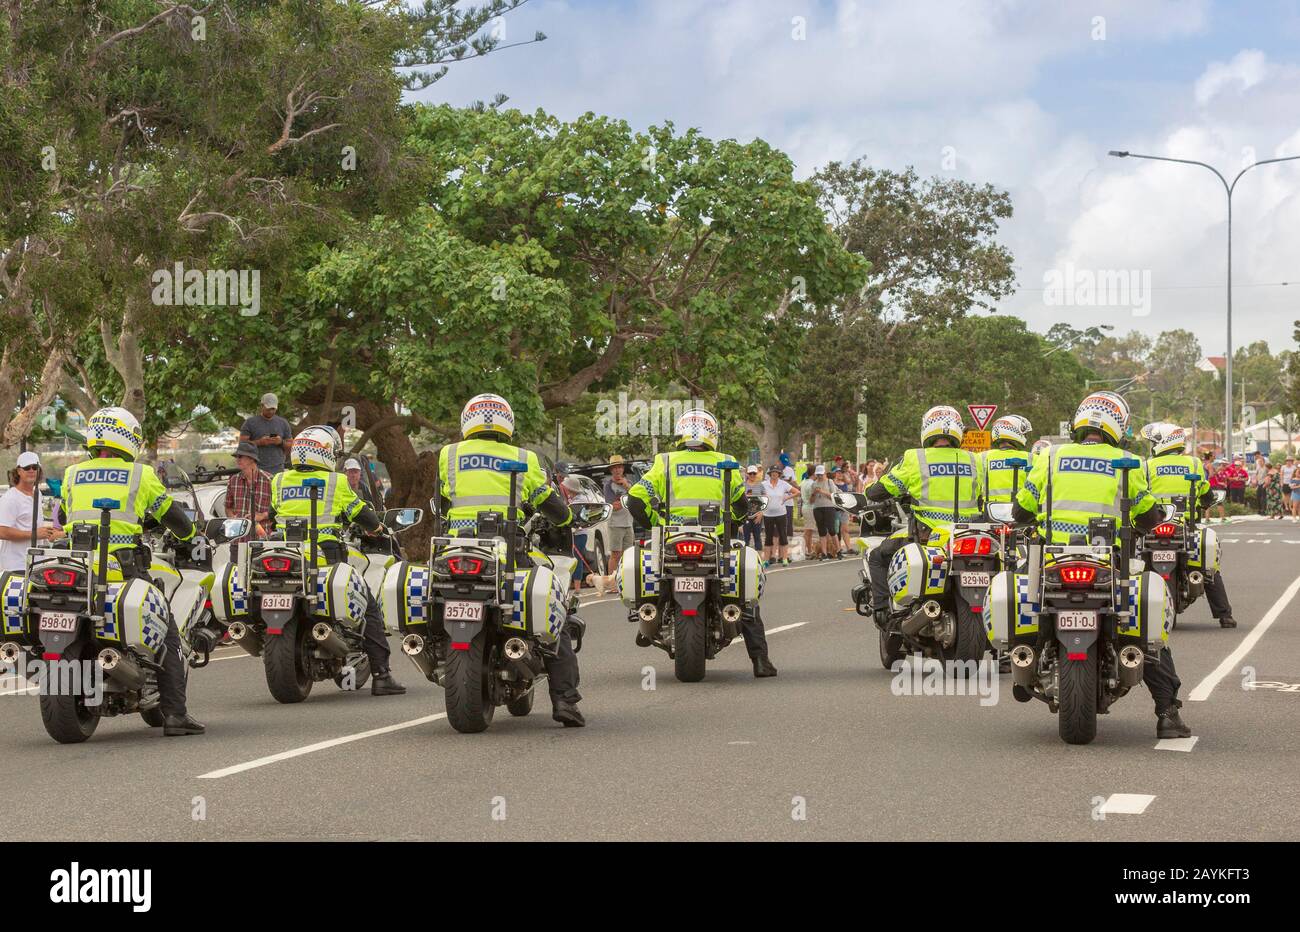 Sandgate Brisbane Australia - 30 March 2018. Queensland motorbike police escorting the runners carring the Queens banner for the Commonwealth Games al Stock Photo